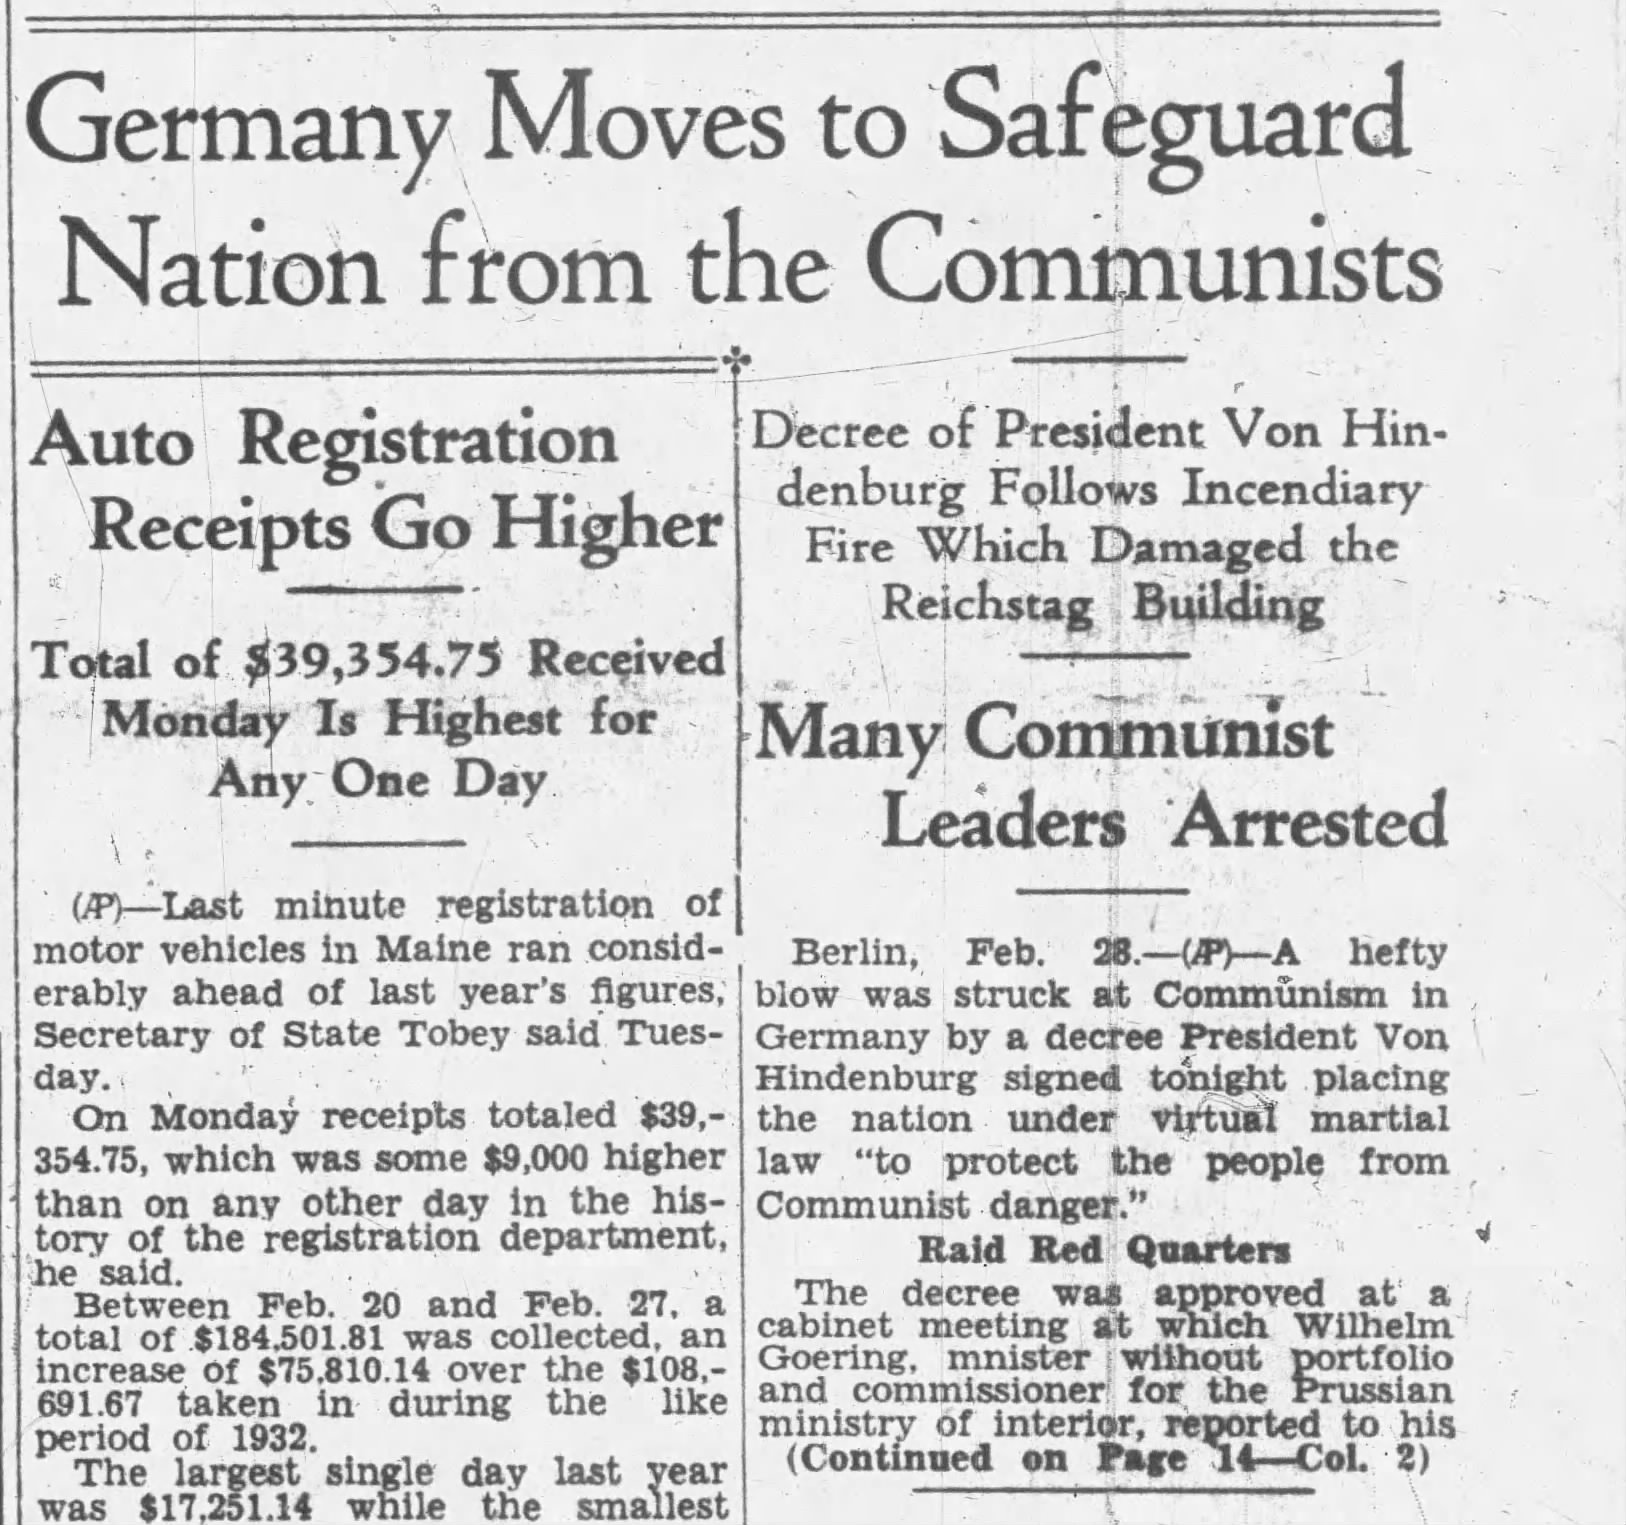 Germany Moves to Safeguard Nation from the Communists